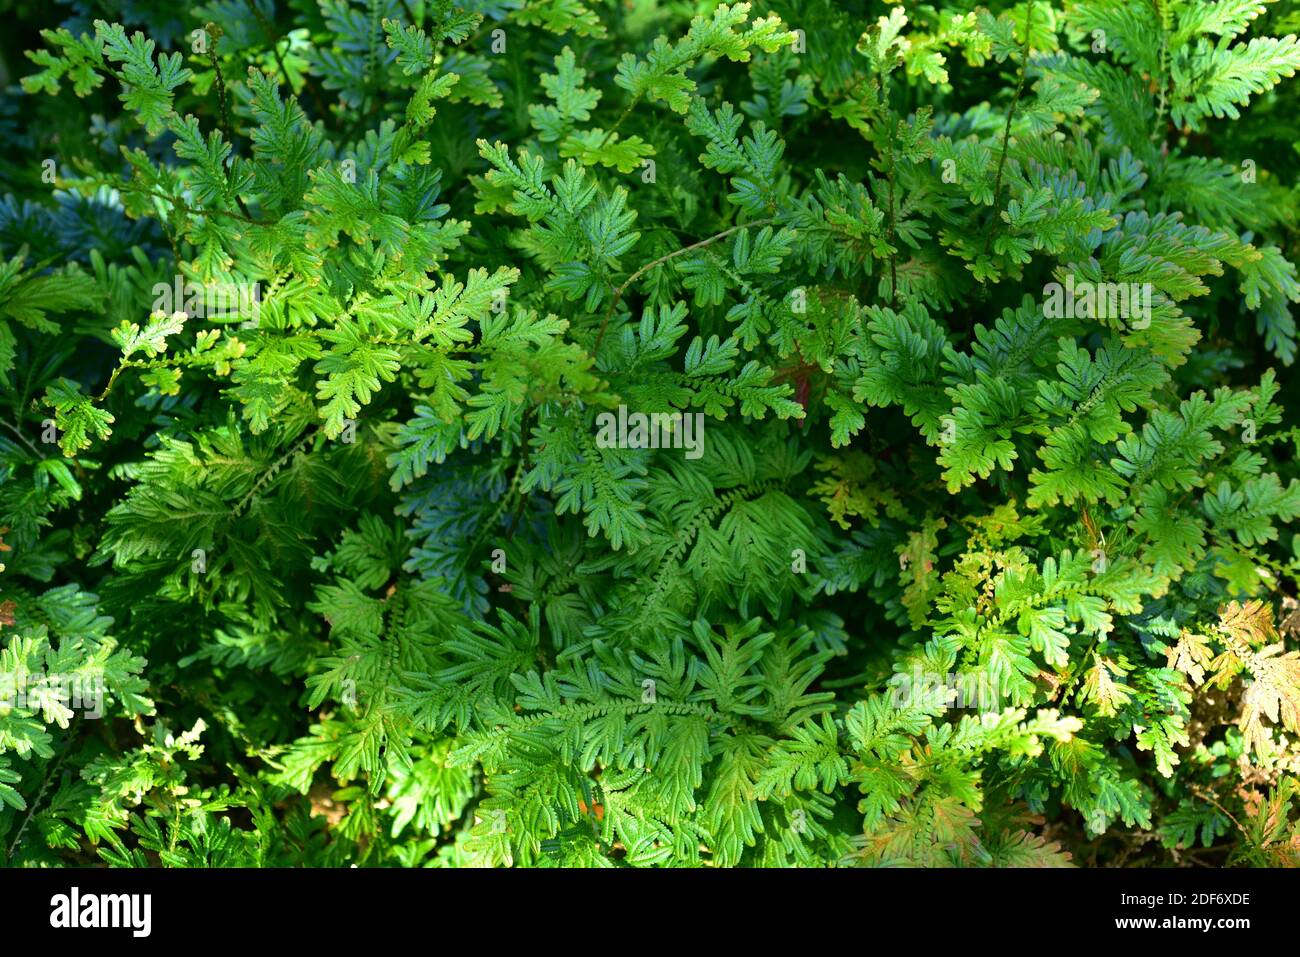 Willdenow spikemoss (Selaginella willdenowii) is an iridiscent vascular plant native to southern Asia. Stock Photo